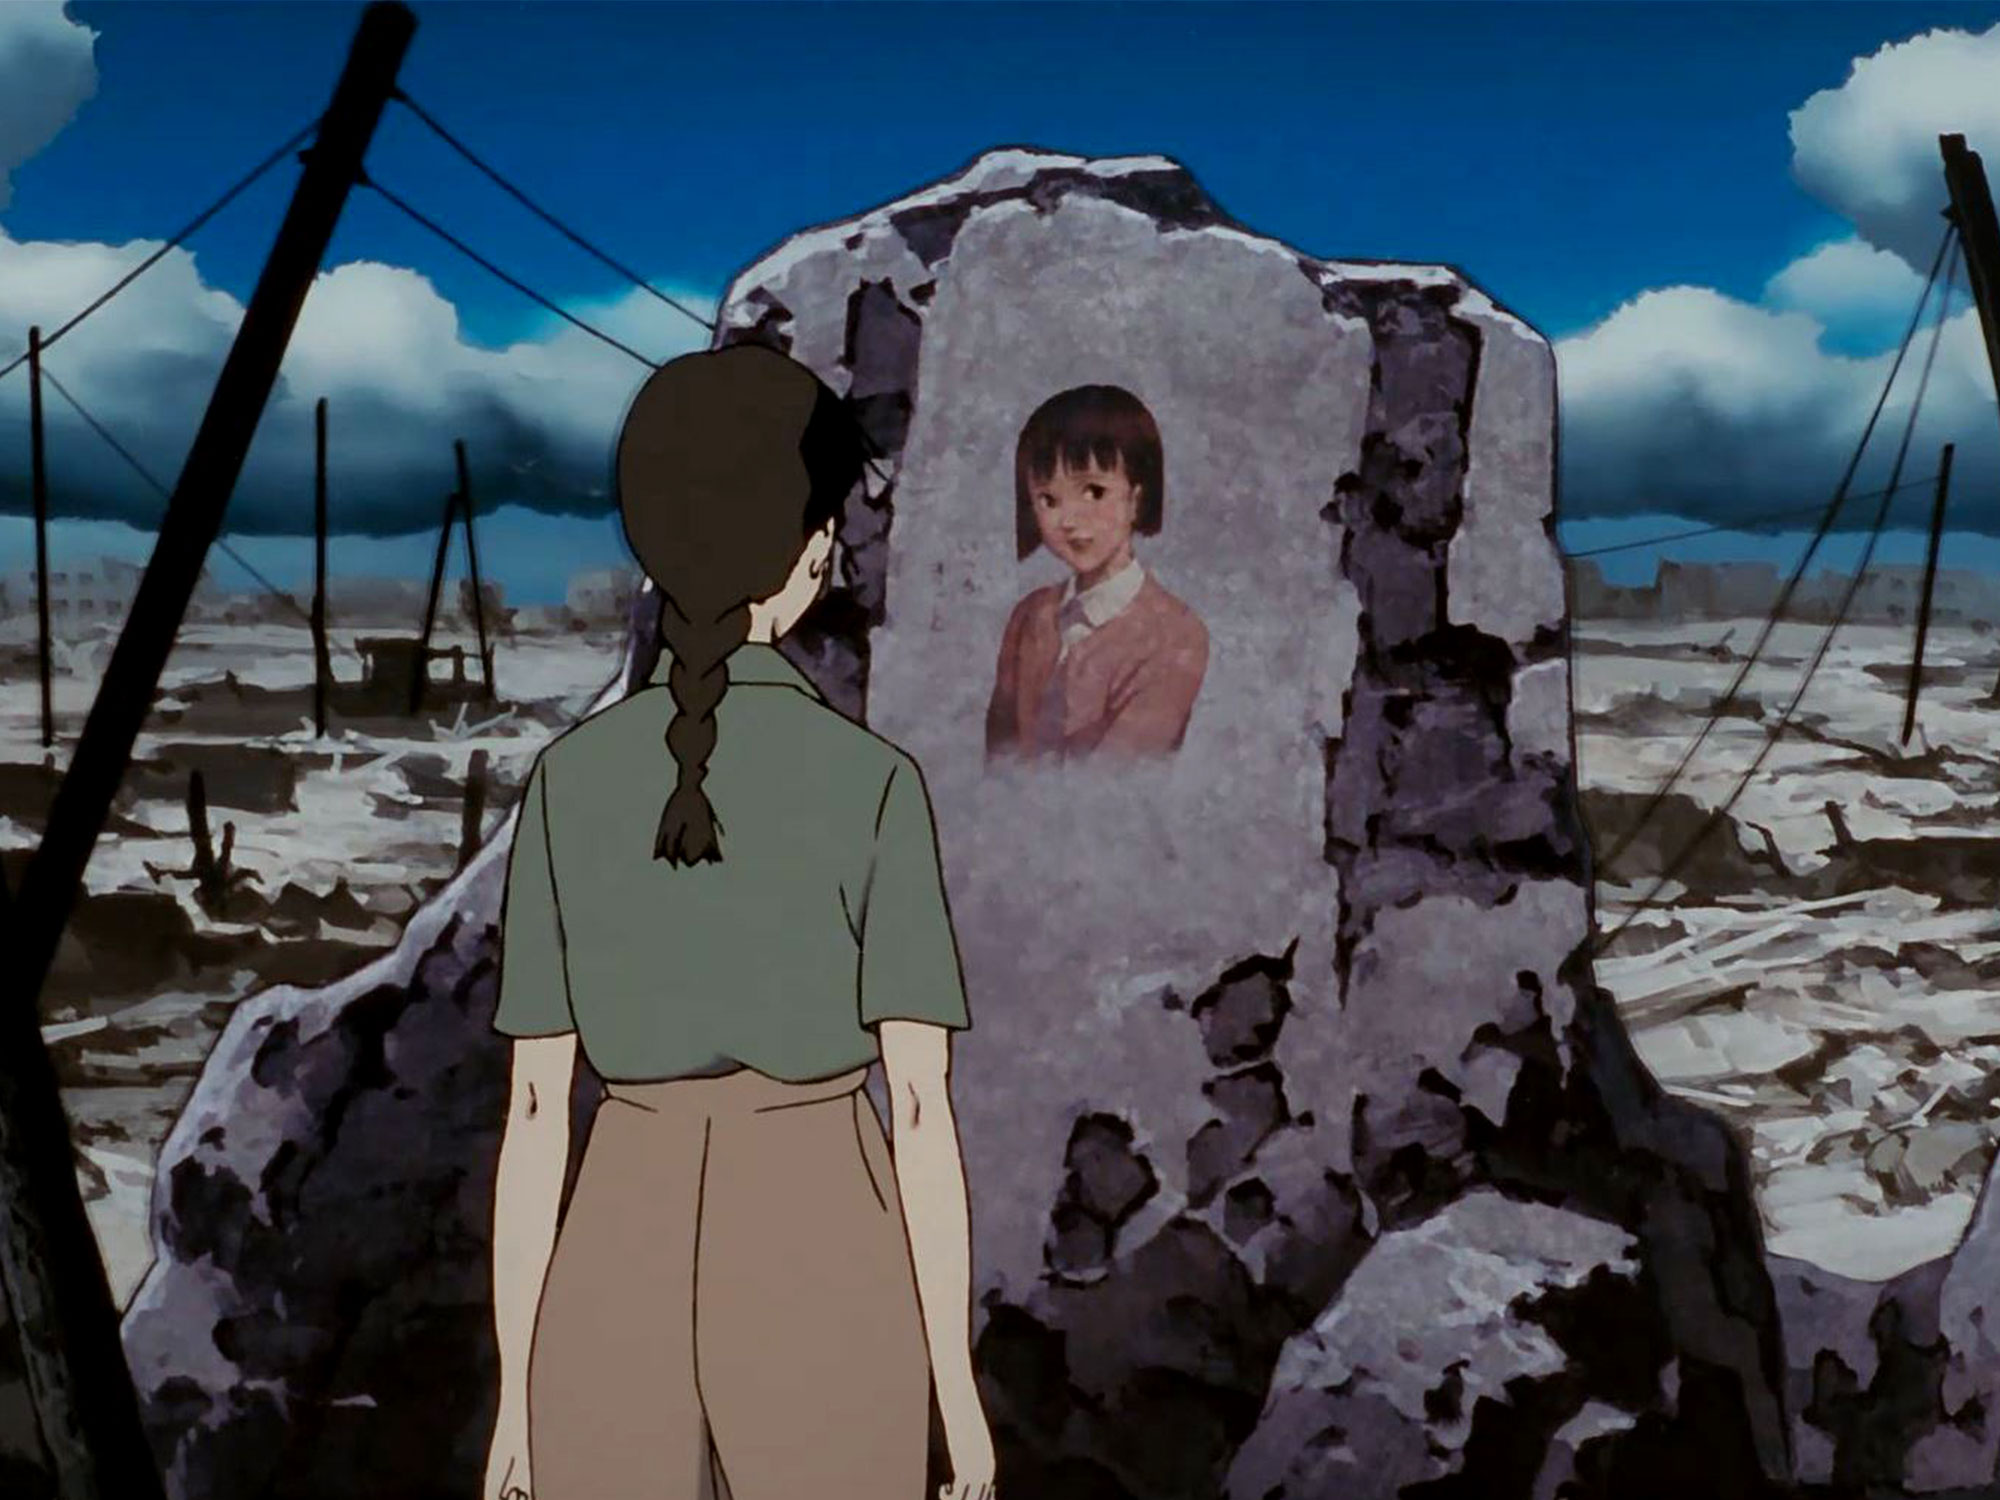 Why Millennium Actress remains one of cinema's greatest love letters